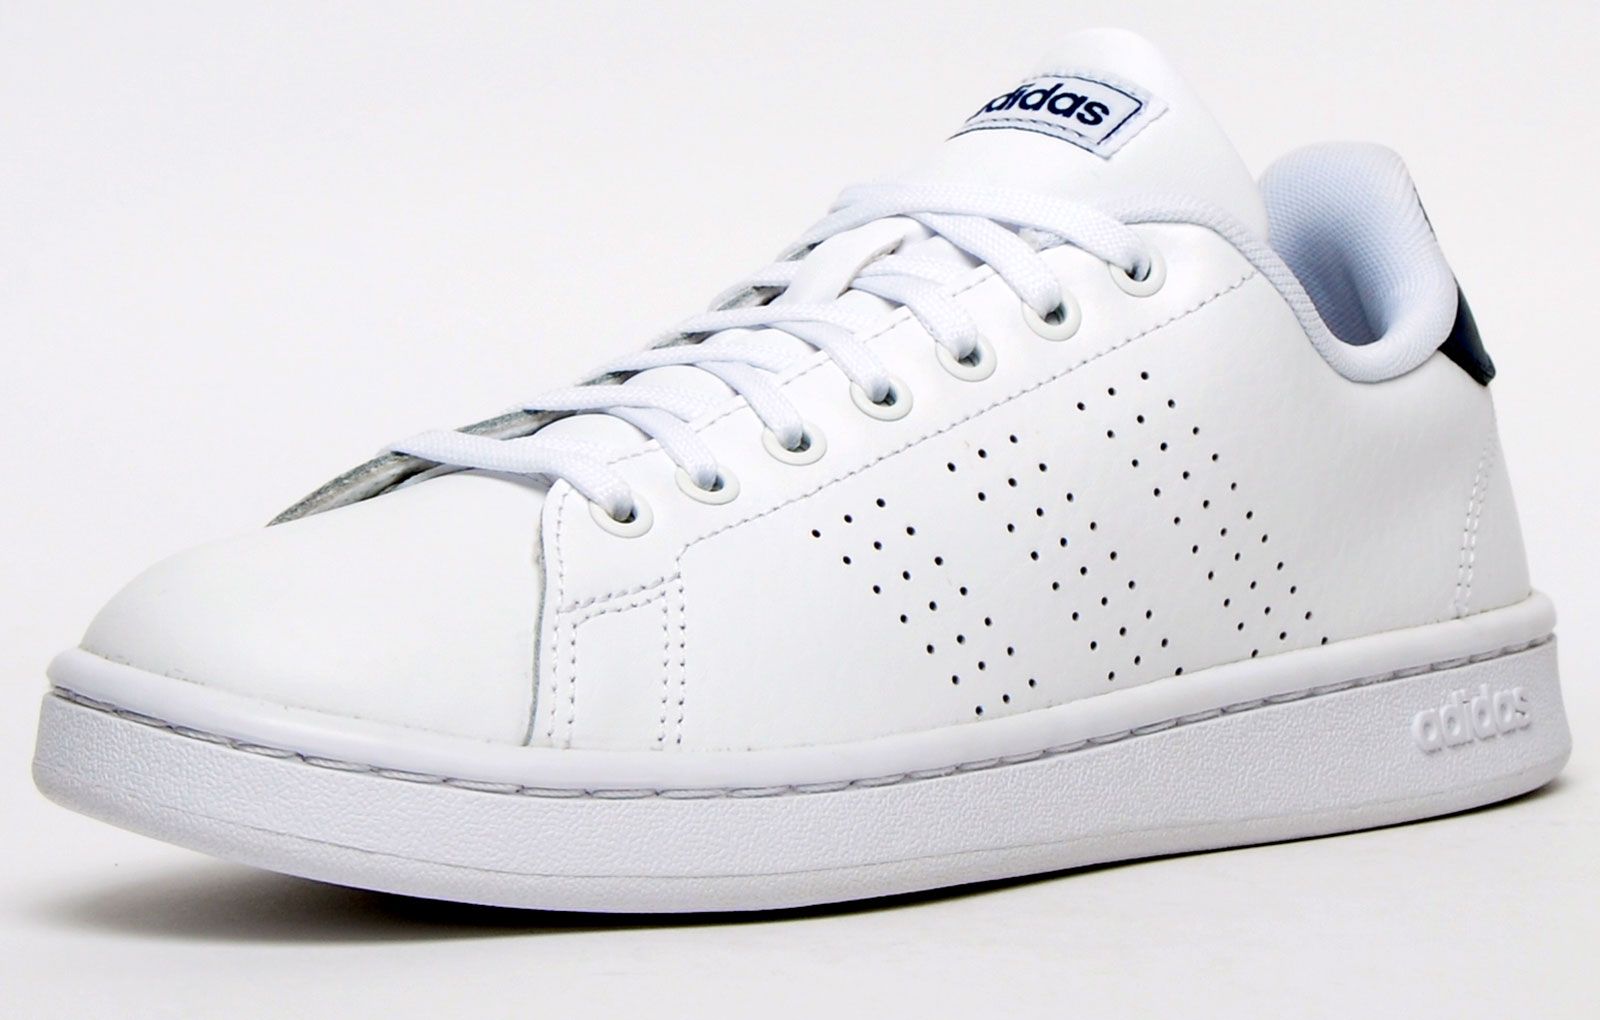 Step out in unbeatable Adidas style with this new in Adidas Advantage lifestyle trainer. These Adidas trainers have a vintage styled throwback court look with improved modern comfort. Designed in an on-trend crisp clean white colourway and detailed with perforated 3-stripes to the side for a luxe designer led finish. The contrasting navy trims show of the visual aesthetics of this classic trainer while the padded heel and ankle collar, plus the super comfy cloudfoam comfort insole moulds the trainer to your foot for superior step in comfort throughout your daily wear.
 - Leather / synthetic upper 
 - Secure up front lace fastening 
 - Cloudfoam cushioned insole offers comfort 
 - Cloudfoam insole cushioning 
 - Textured vintage style sole unit
 - Adidas branding throughout

Please Note: 

These Adidas trainers are sold as B grades which means there may be some very slight cosmetic issues on the shoe and they come in a white Adidas box with on most occasions the Adidas brand authenticity details attached to them. There could occasional be issues with wrong swing tags being allocated to wrong shoes by Adidas themselves which could result in some size confusion but you must take the size IN THE SHOE as the size that the shoe actually is ( not what is on the tag ). We have checked most of the shoes and in our opinion, all are practically perfect without any blemishes on them at all and in essence if the shoes did not have the letter B denoted on the swing tag you would presume these were perfect shoes. All shoes are guaranteed against fair wear and tear and offer a substantial saving against the normal high street price. The overall function or performance of the shoe will not be affected by any minor cosmetic issues. B Grades are original authentic products released by the brand manufacturer with their approval at greatly reduced prices. If you are unhappy with your purchase, we will be more than happy to take the shoes back from you and issue a full refund